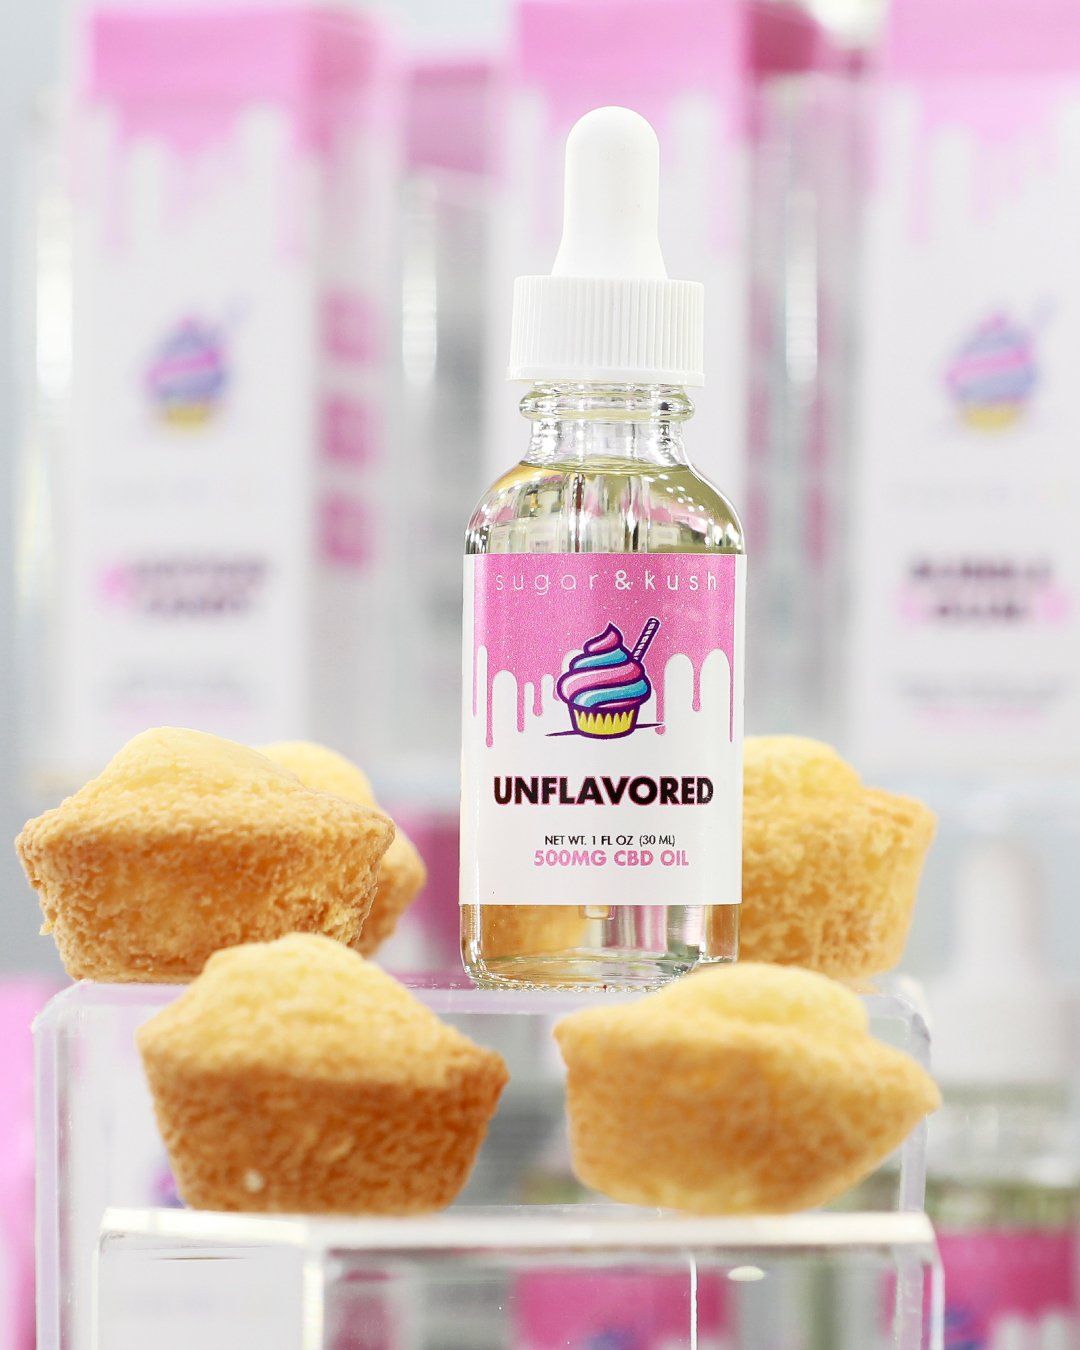 Buy the best Unflavored CBD Oil and CBD Oil from sugarandkush. Save on our unflavored hemp oil with Sugar and Kush discounts.